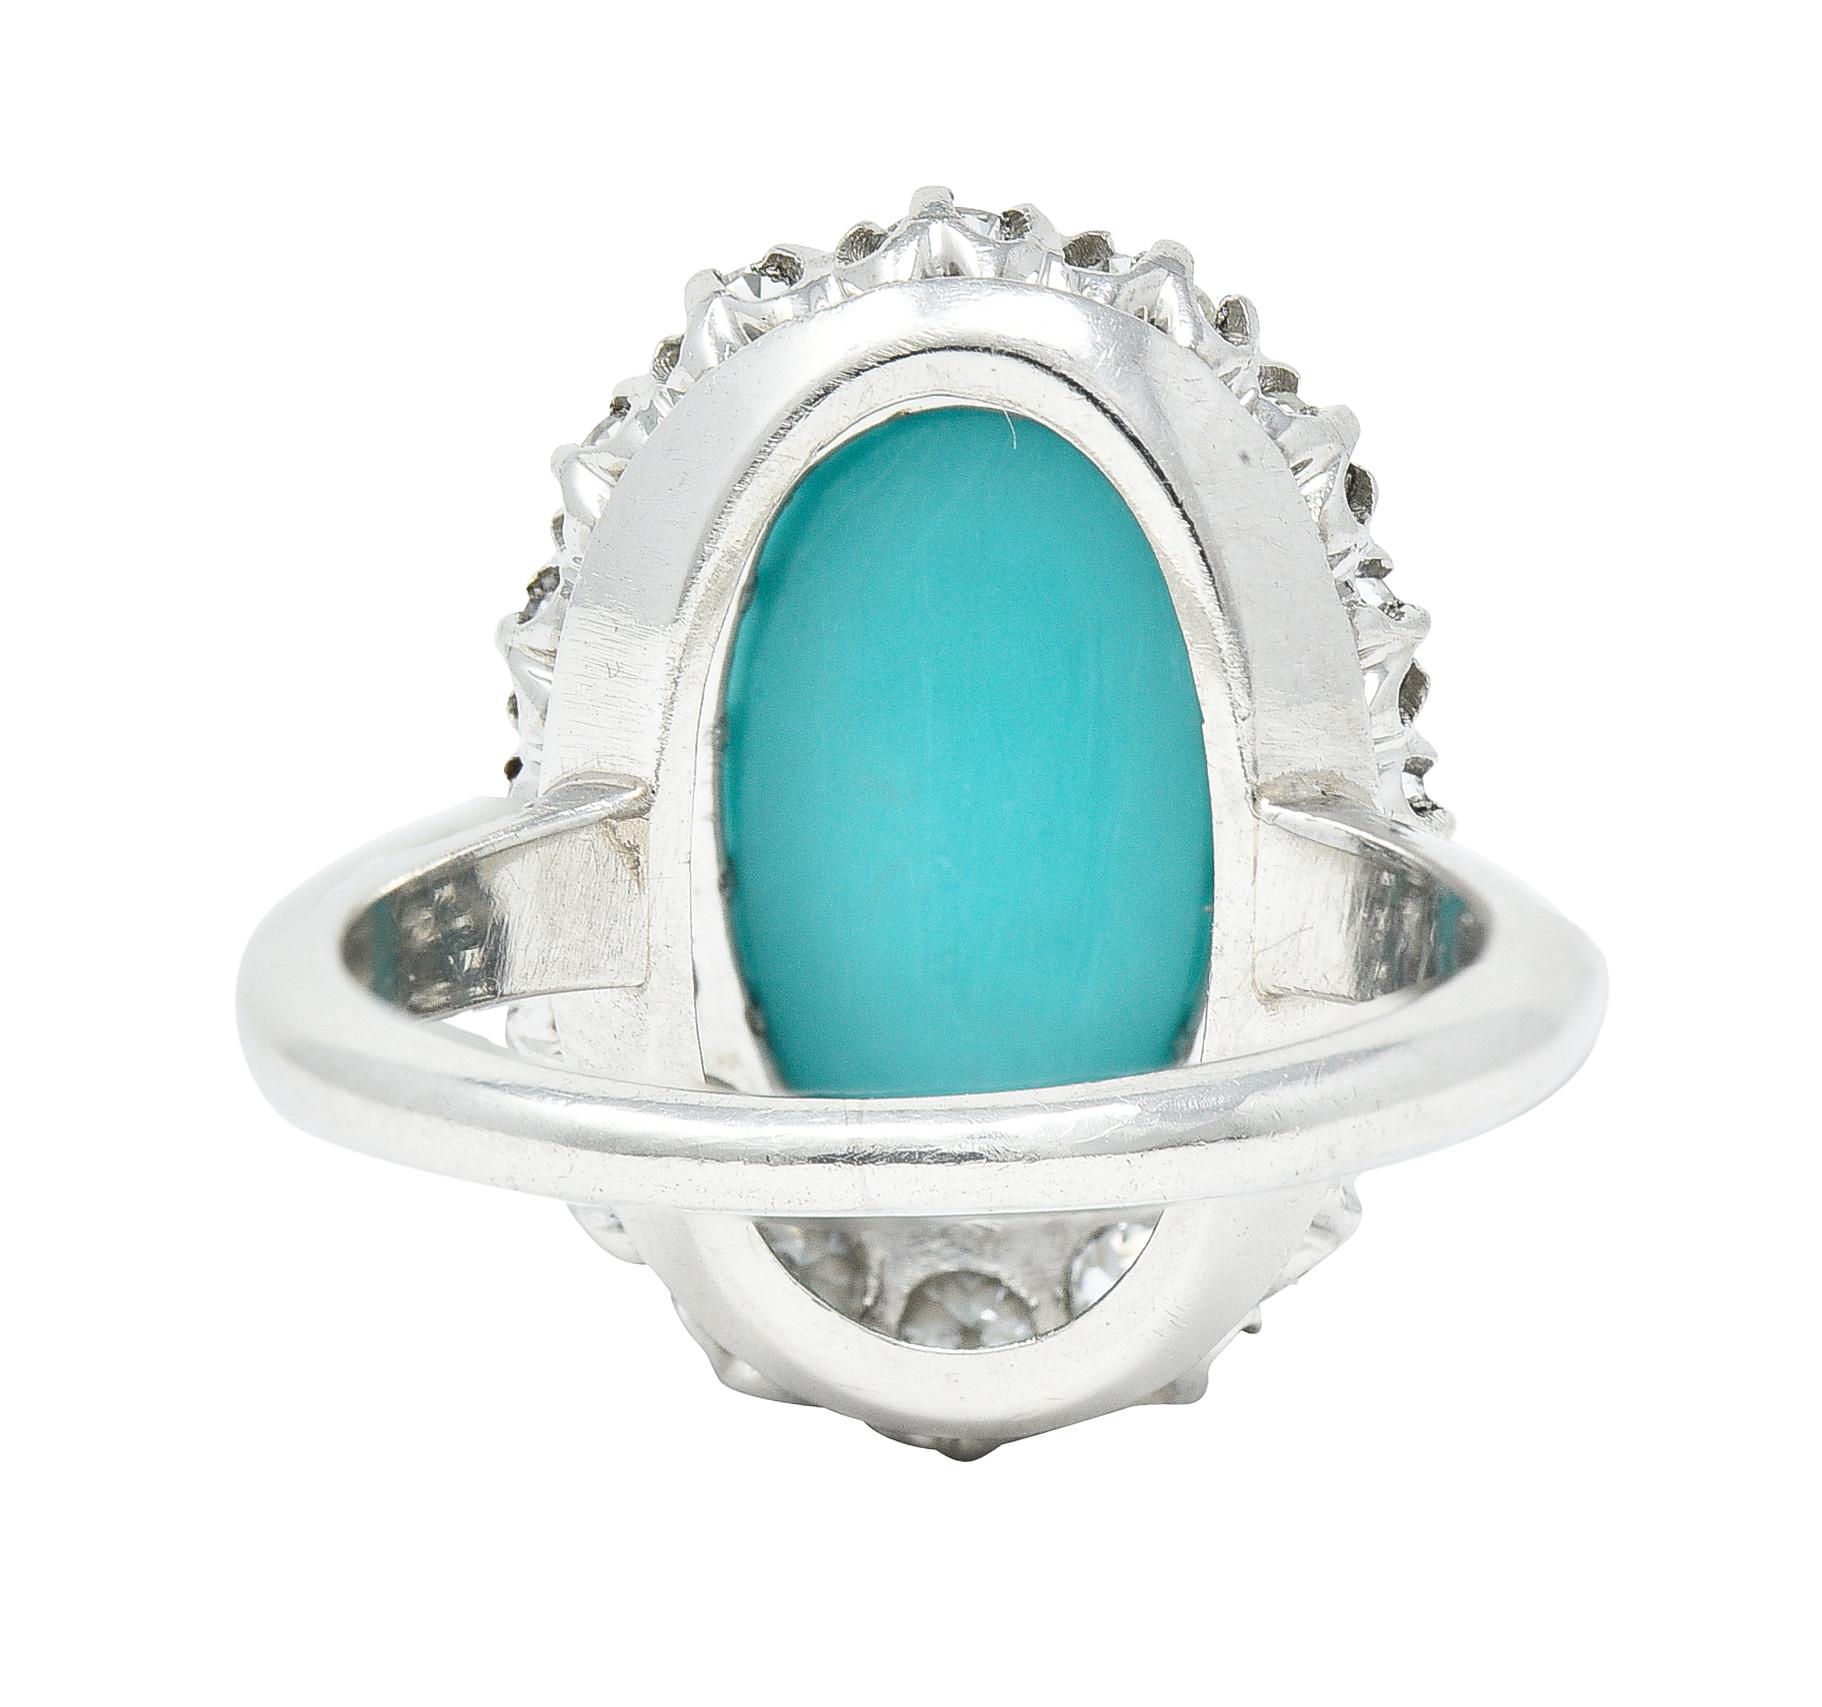 Art Deco 1.12 Carats Turquoise Cabochon Transitional Cut Diamond Platinum Ring In Excellent Condition For Sale In Philadelphia, PA